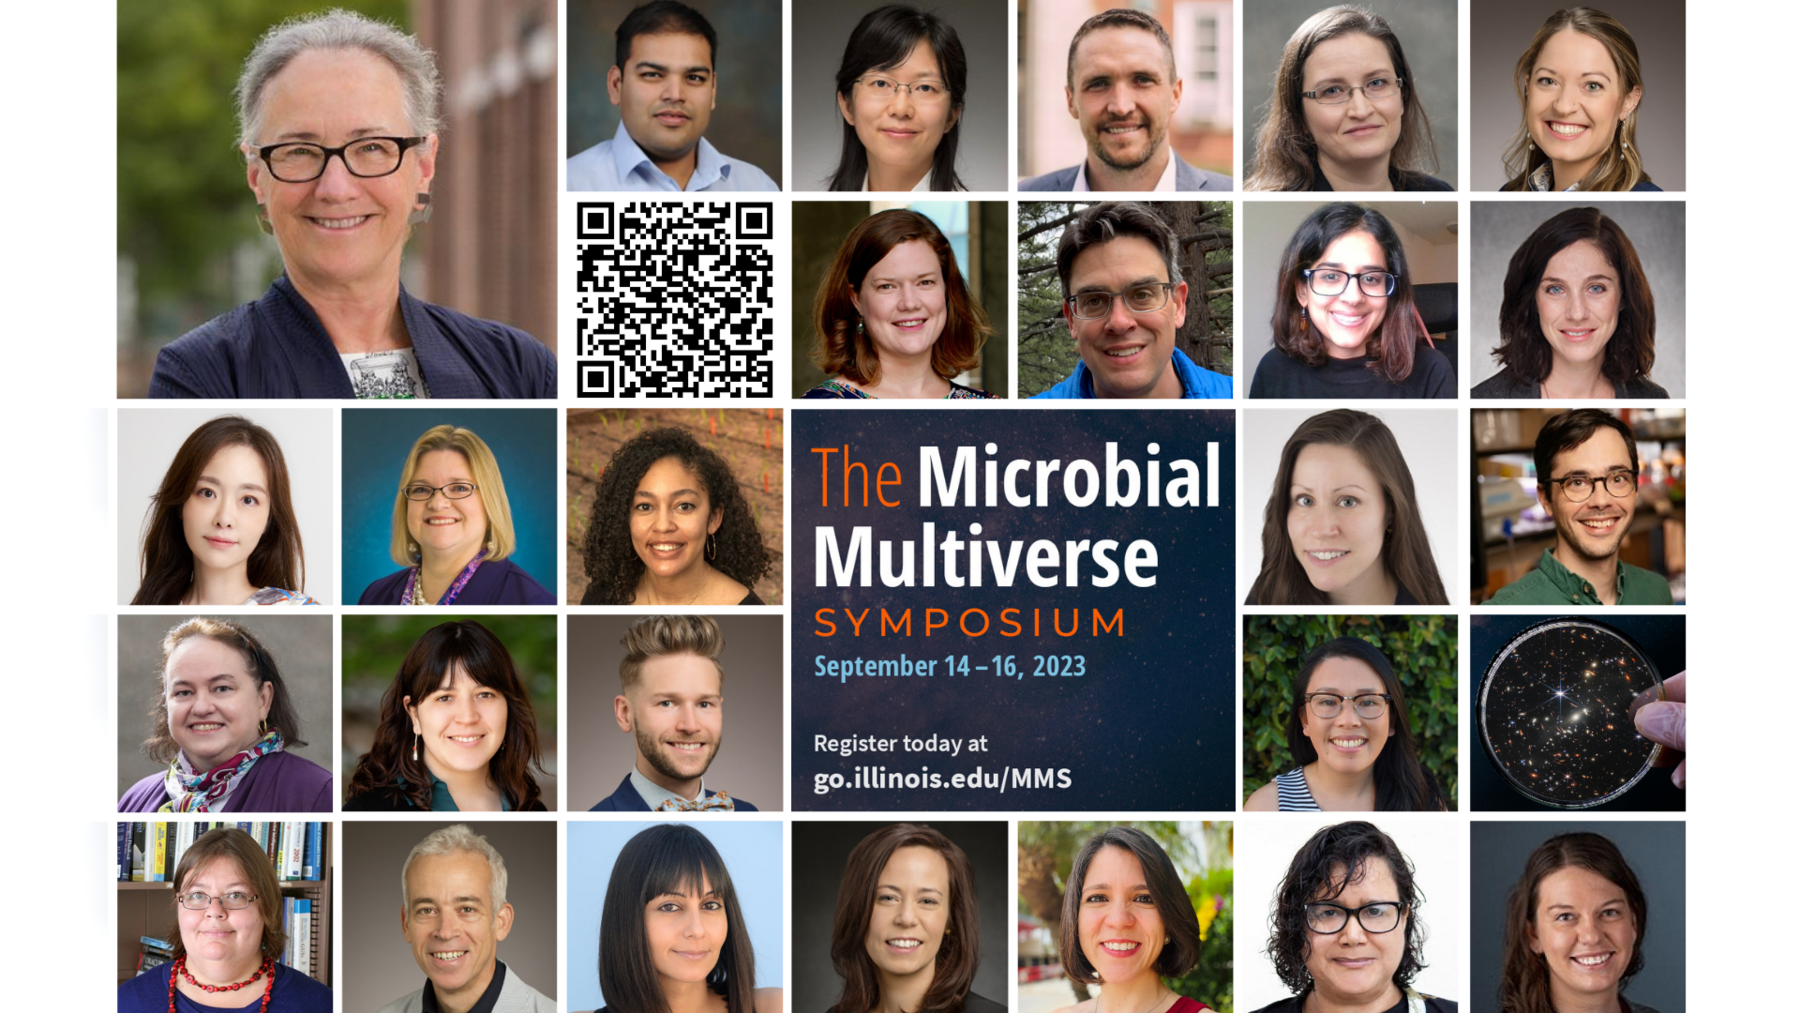 Headshots of all speakers at the Microbial Multiverse Symposium